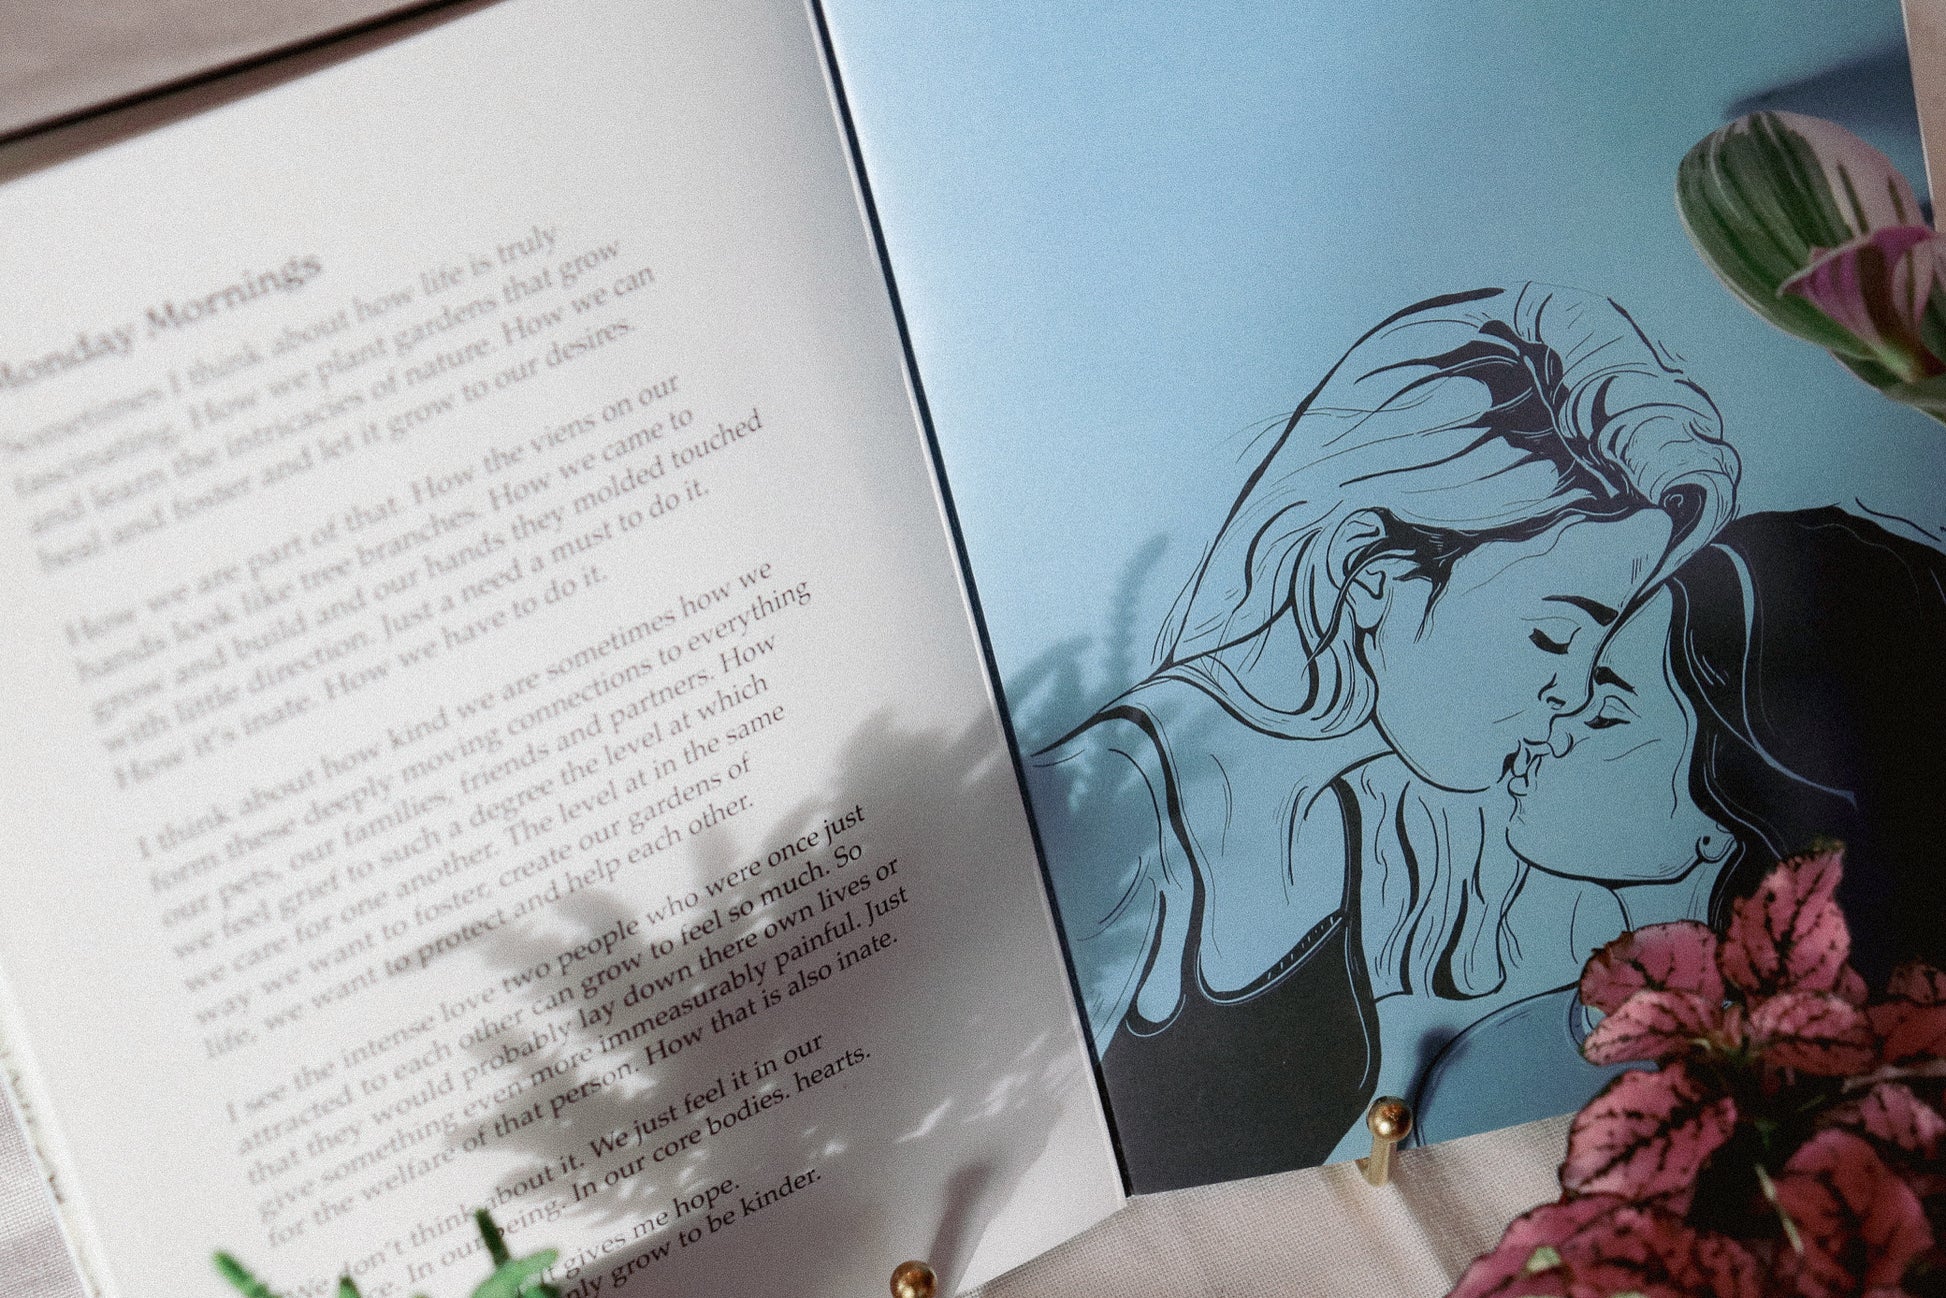 Lesbian and womens poetry book illustrated and witted by Courtney L Ellis Illustrations. LGBTQ+ Poetry about breakups love poems for him or her meaningful and soulful poetry advice finding your path words of wisdom